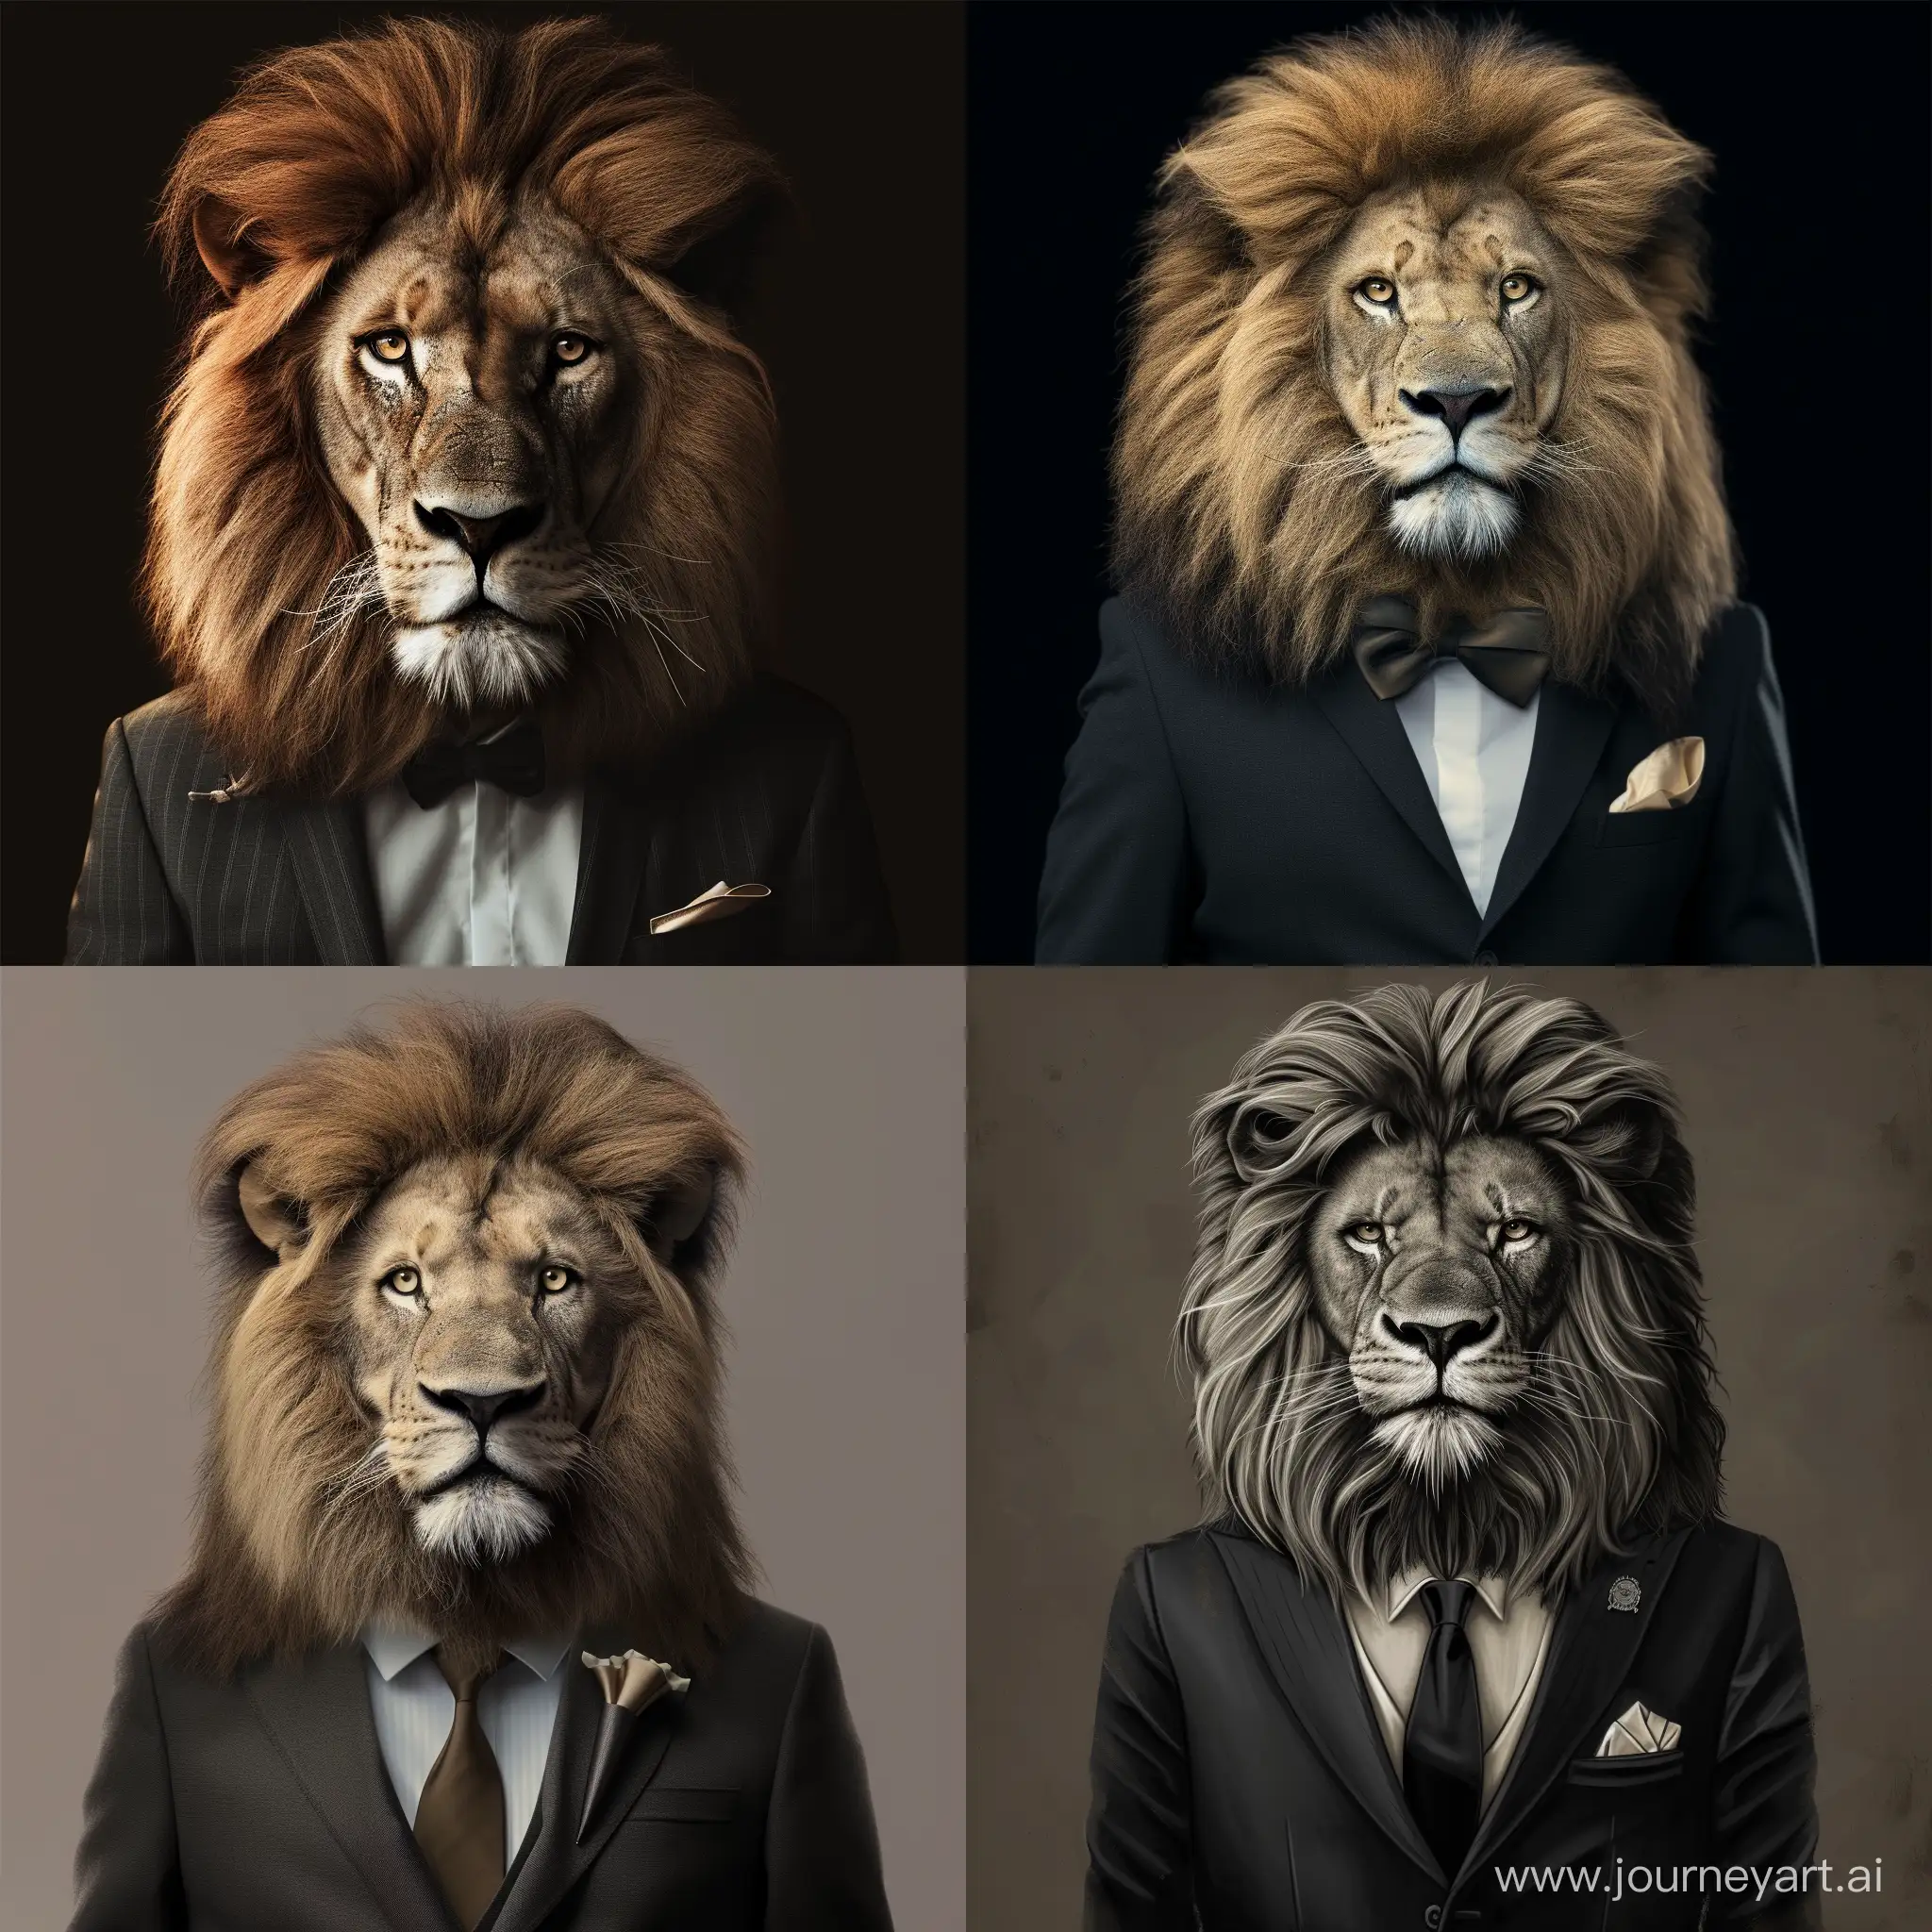 Generate lion with suits